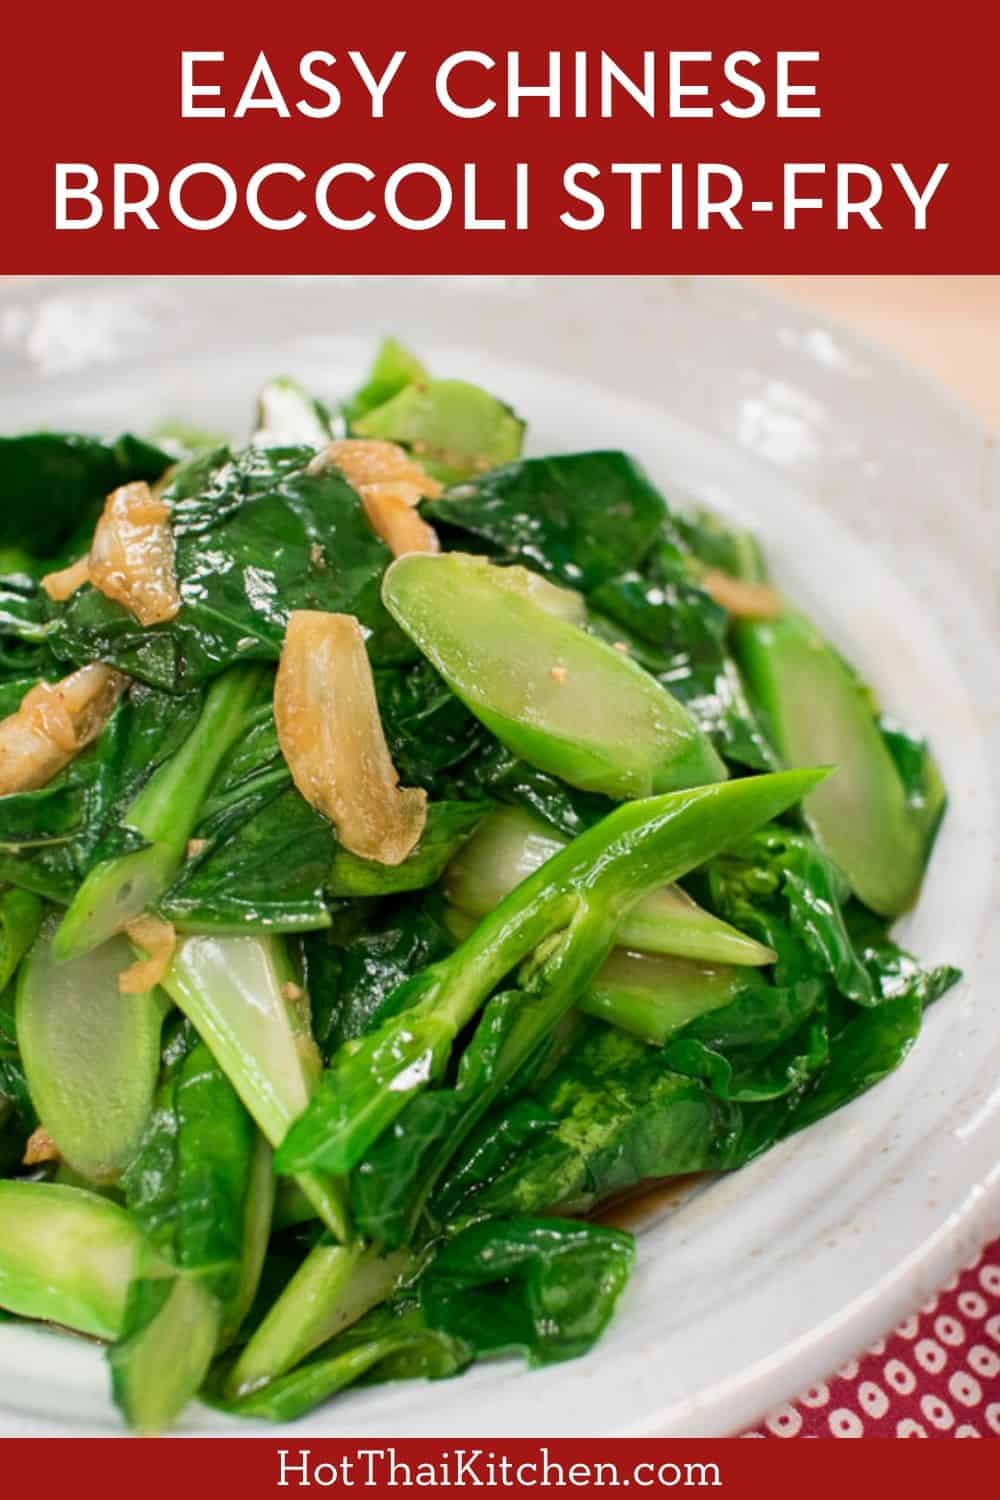 Easy and delicious vegetable side dish perfect for a weeknight meal. Gai lan (Chinese broccoli) stir-fried with garlic and oyster sauce goes well with any Asian meal! #sidedish #veggierecipe #hotthaikitchen